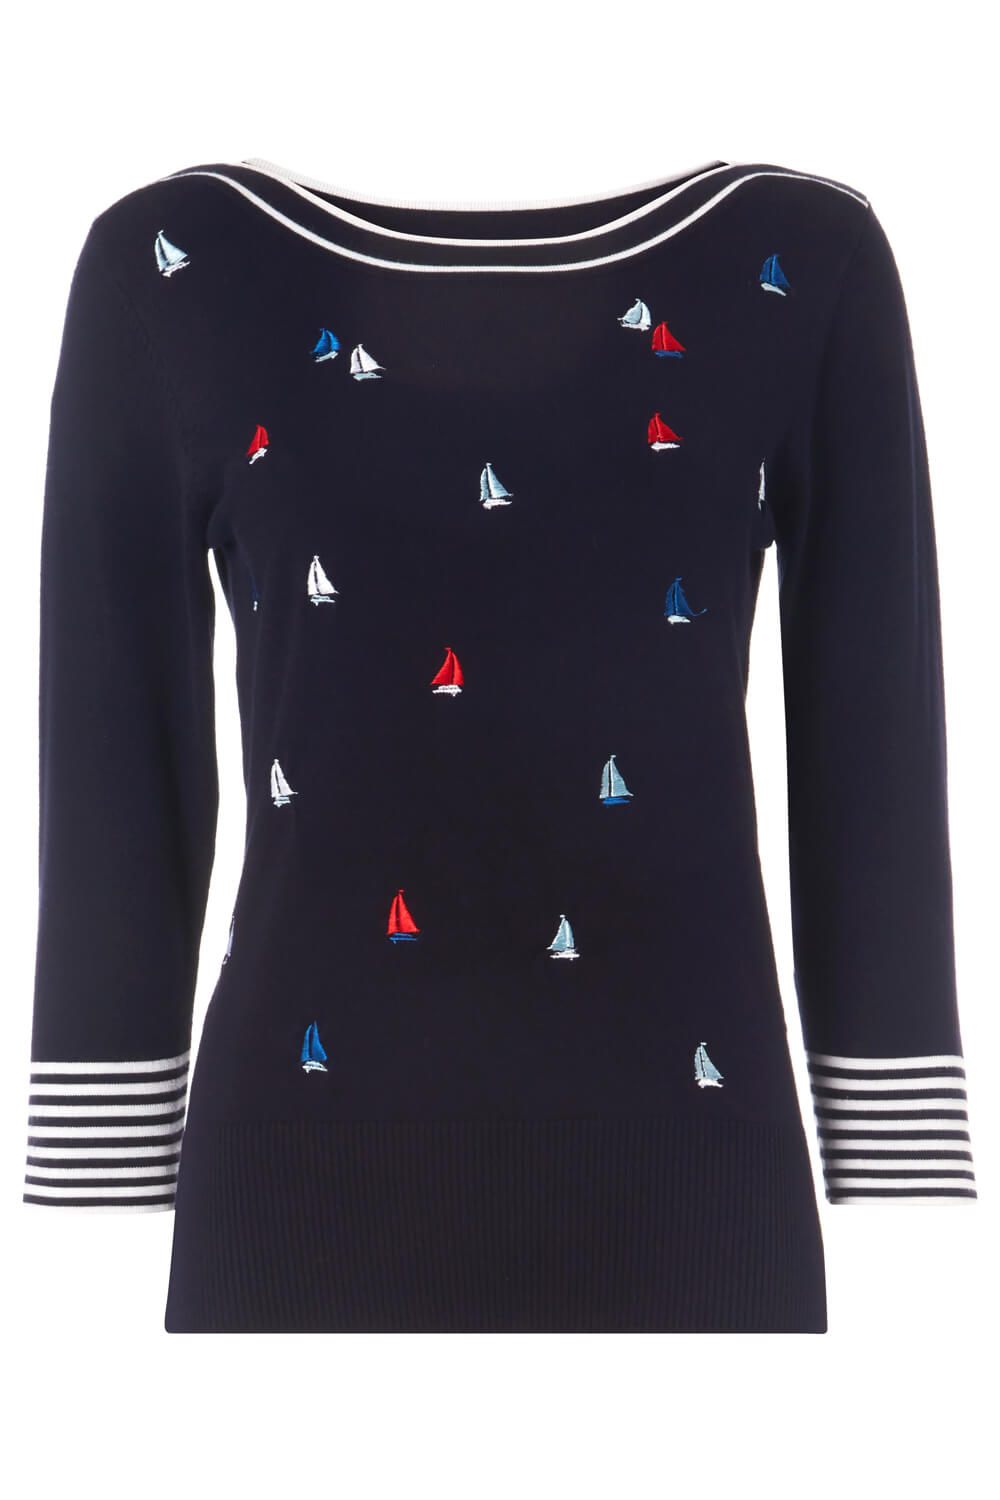 Navy  Boat Embroidered Jumper, Image 5 of 5